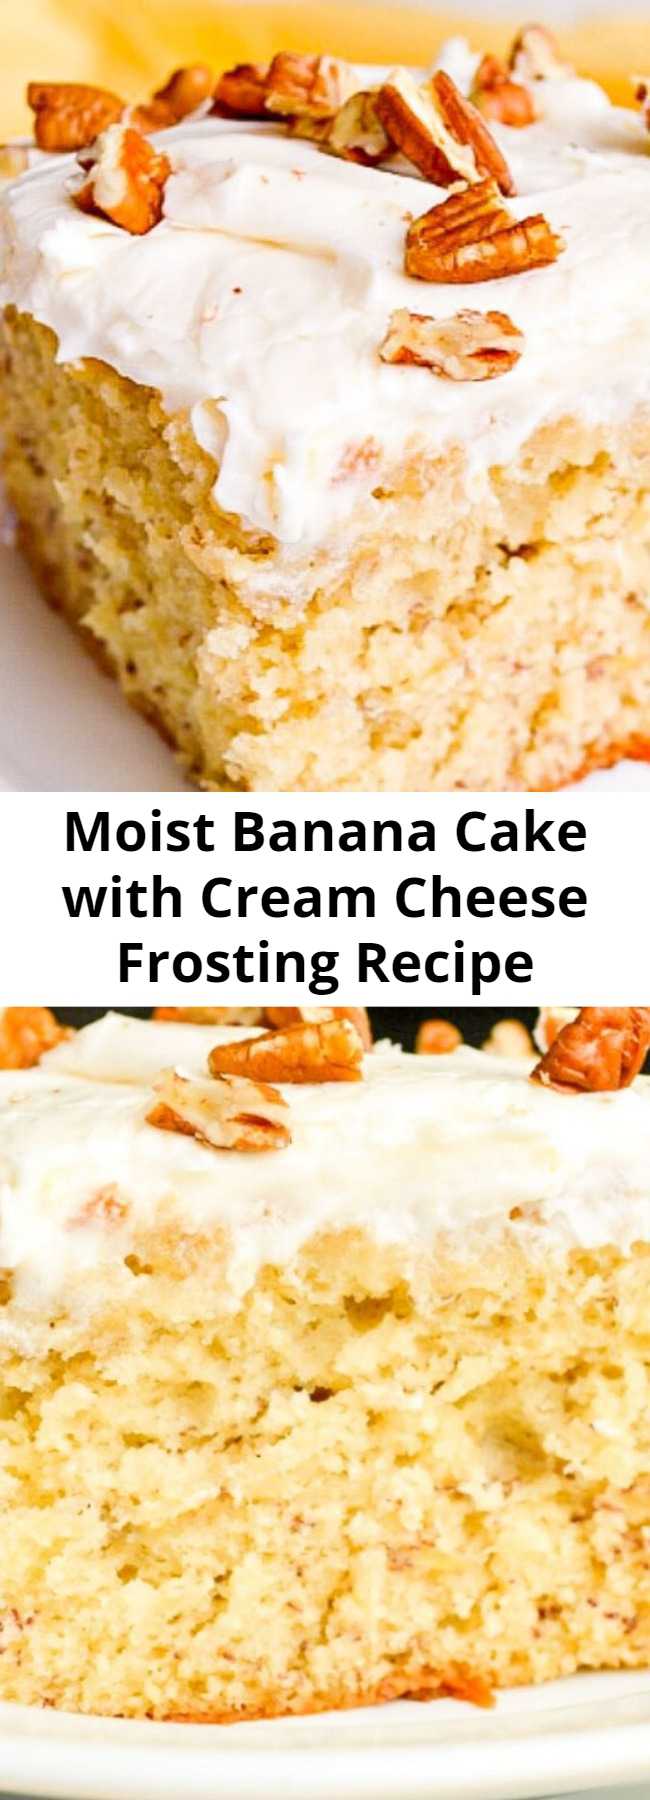 Moist Banana Cake with Cream Cheese Frosting Recipe - Banana Cake with Cream Cheese Frosting combines common pantry ingredients into a tender, moist cake with tons of banana flavor and a tangy, sweet frosting!